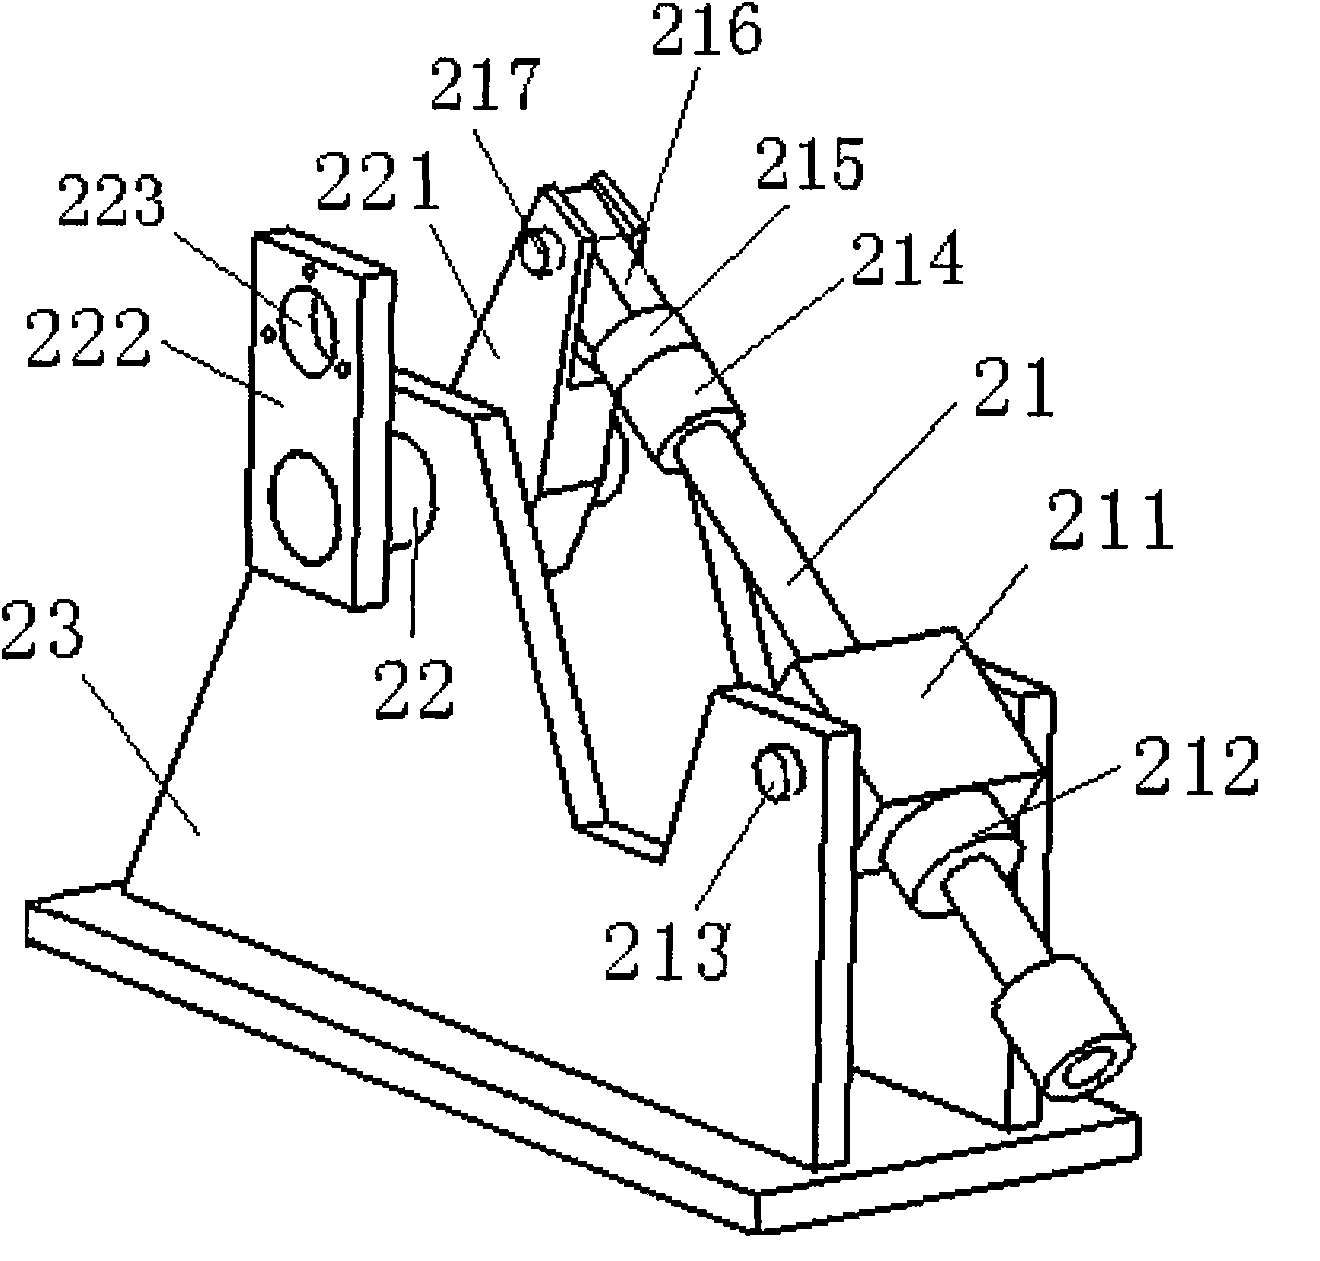 Torsional vibration excitation device and test bed of vehicle drive system